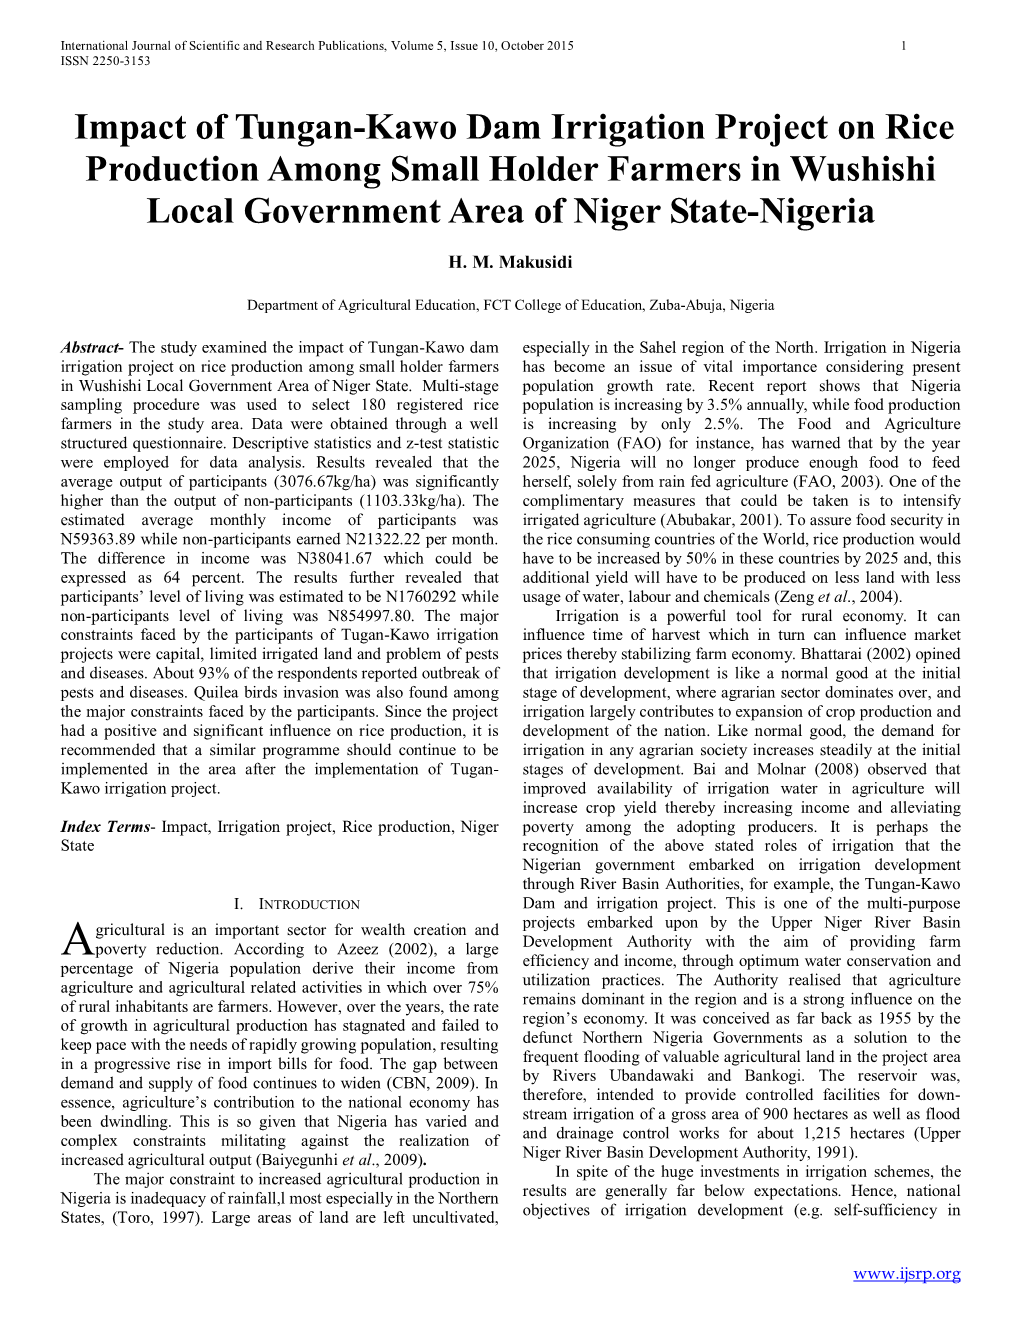 Impact of Tungan-Kawo Dam Irrigation Project on Rice Production Among Small Holder Farmers in Wushishi Local Government Area of Niger State-Nigeria